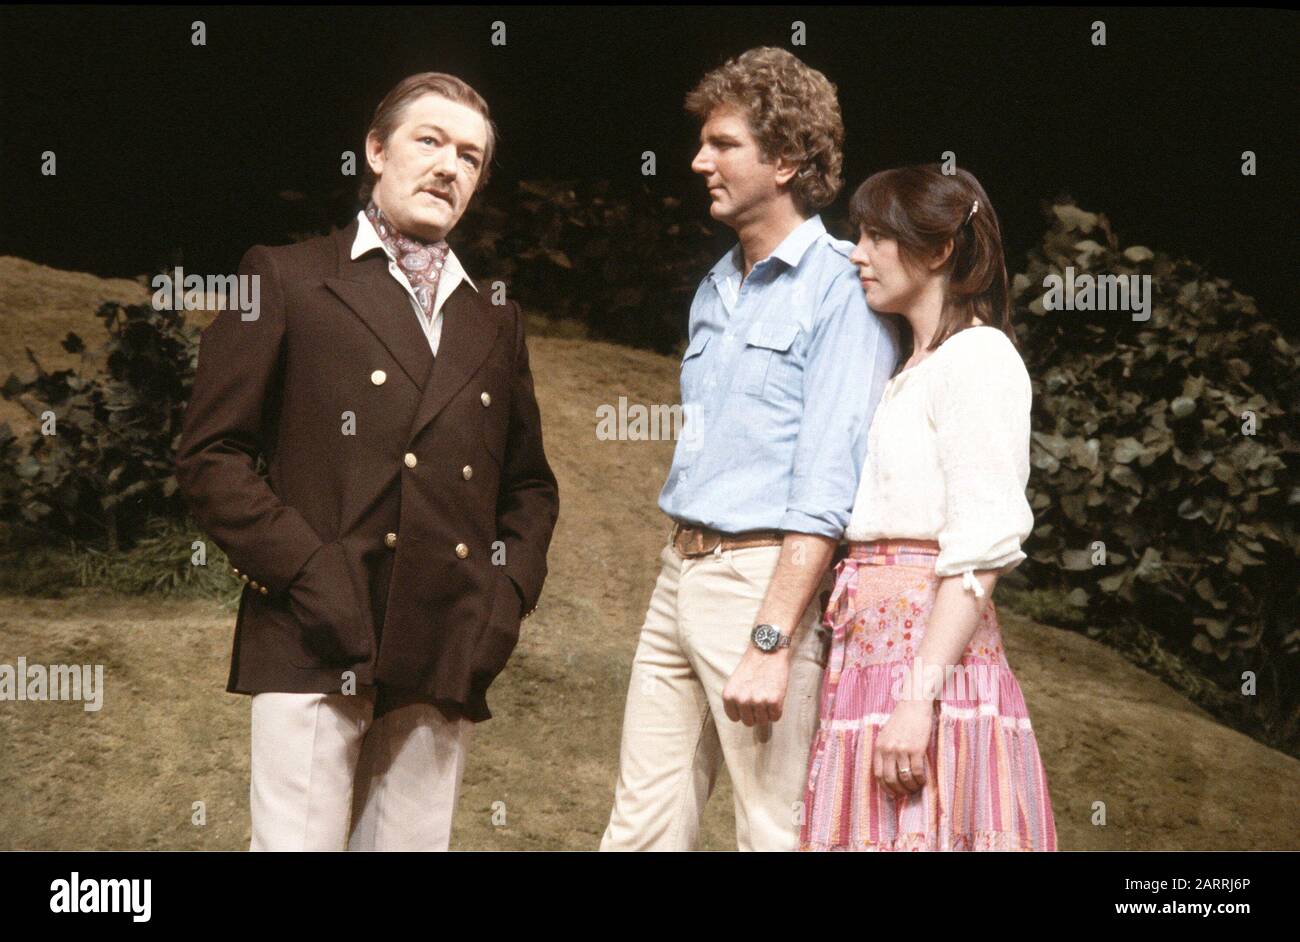 Michael Gambon (as Patrick Smythe), Stephen Moore (as Simon) and Penelope Wilton (as Abigail) in SISTERLY FEELINGS by Alan Ayckbourn directed by Alan Ayckbourn and Christopher Morahan at the National Theatre (NT), London in 1980. Sir Michael Gambon, born in Dublin 1940, moved to London at the age of 6, became a British citizen. Knighted in 1998. Multi-award-winner, including 3 Oliviers and 4 BAFTAs. Stephen Moore, English stage and television actor, born 1937, died 2019. Dame Penelope Wilton, born in Scarborough 1946. English stage, television and film actress. Awarded OBE in 2004 and DBE in 2 Stock Photo